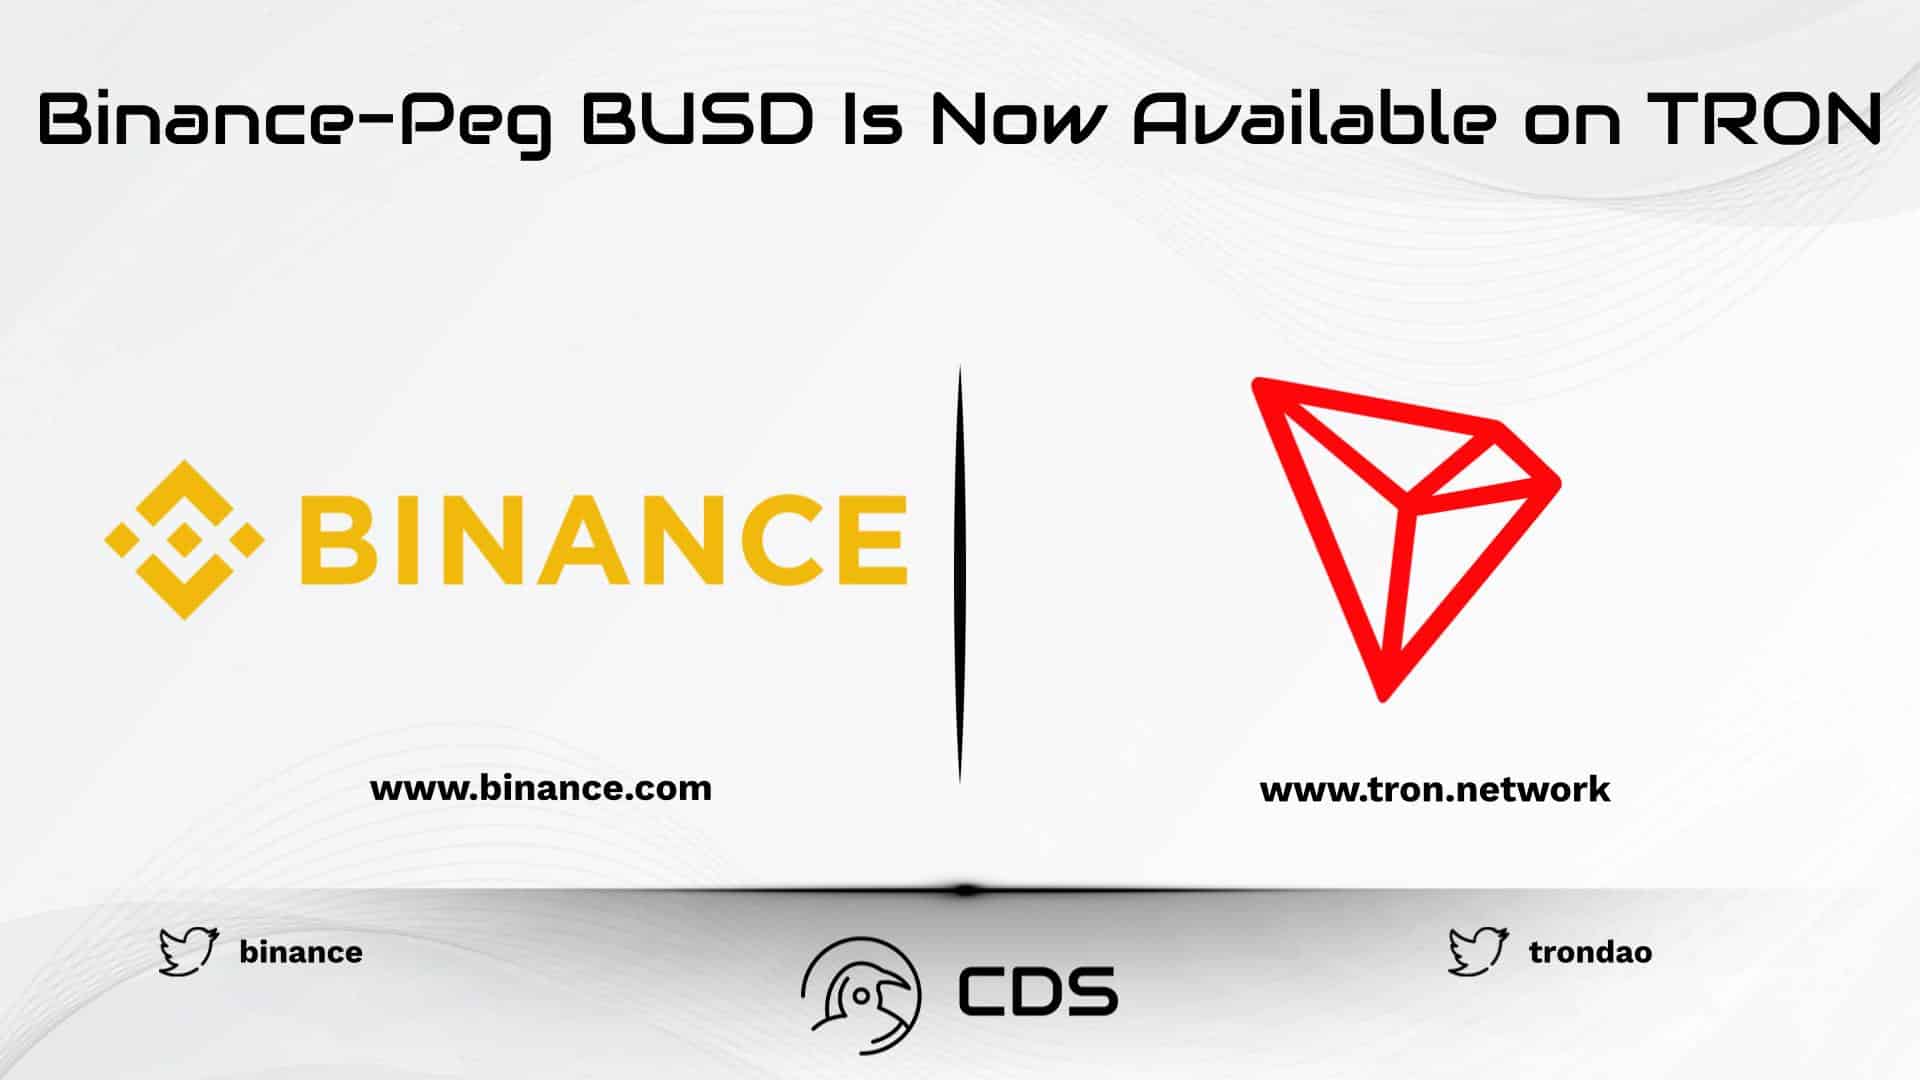 Binance-Peg BUSD Is Now Available on TRON